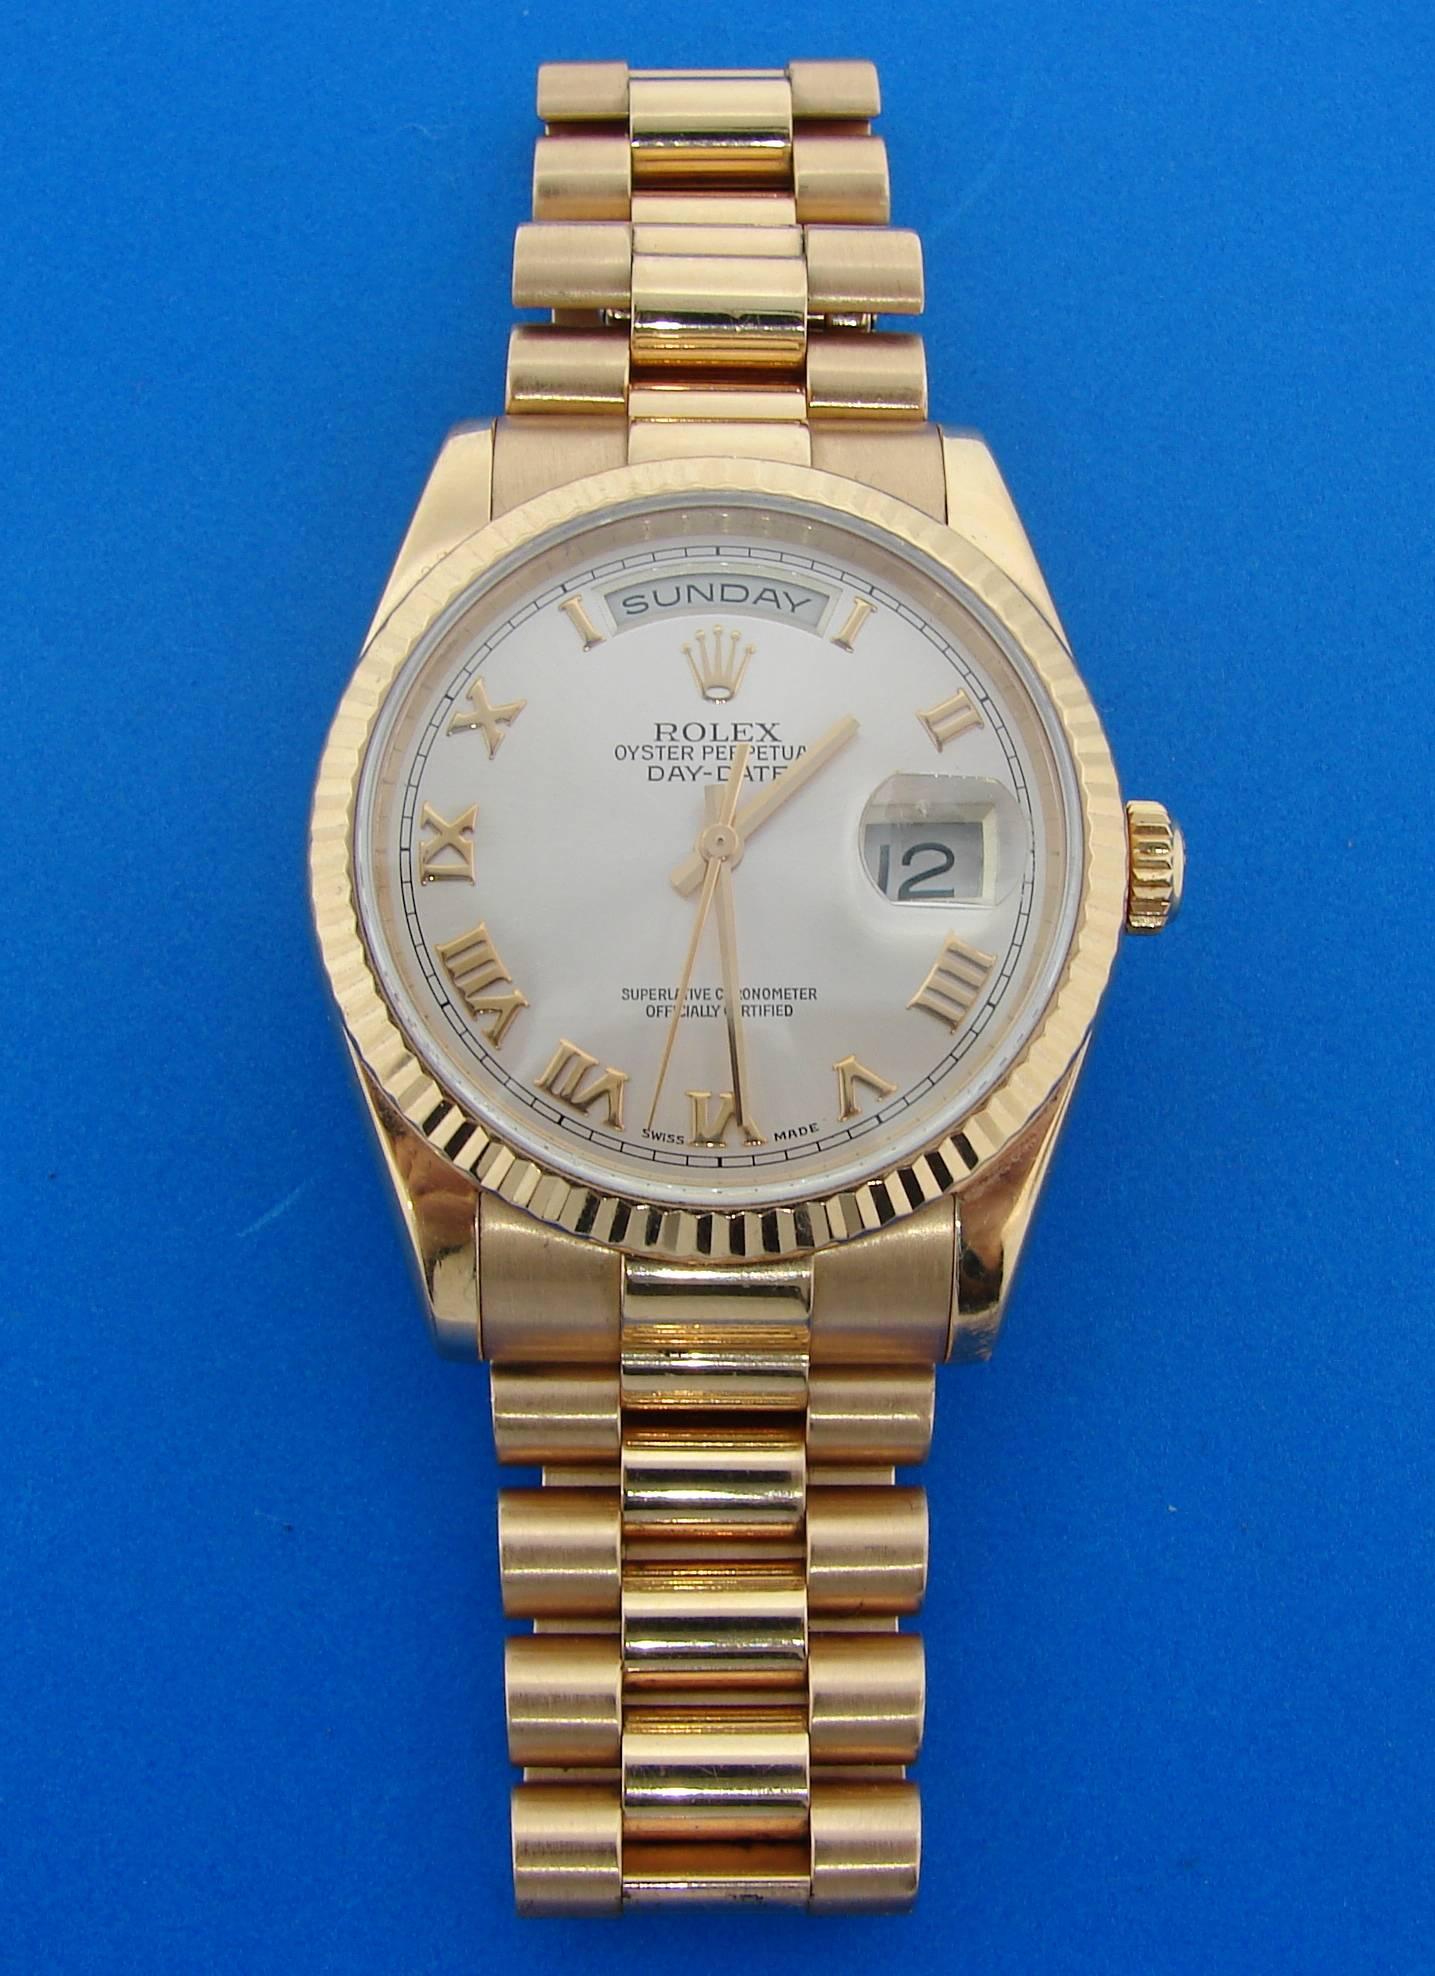 Classy rose gold Rolex Oyster Perpetual Day-Date watch. Hot and desirable, it is a great addition to your watch and jewelry collection.  36 mm case, Swiss made. All parts are original Rolex. One year warranty. Fits up to 9-inch wrist.